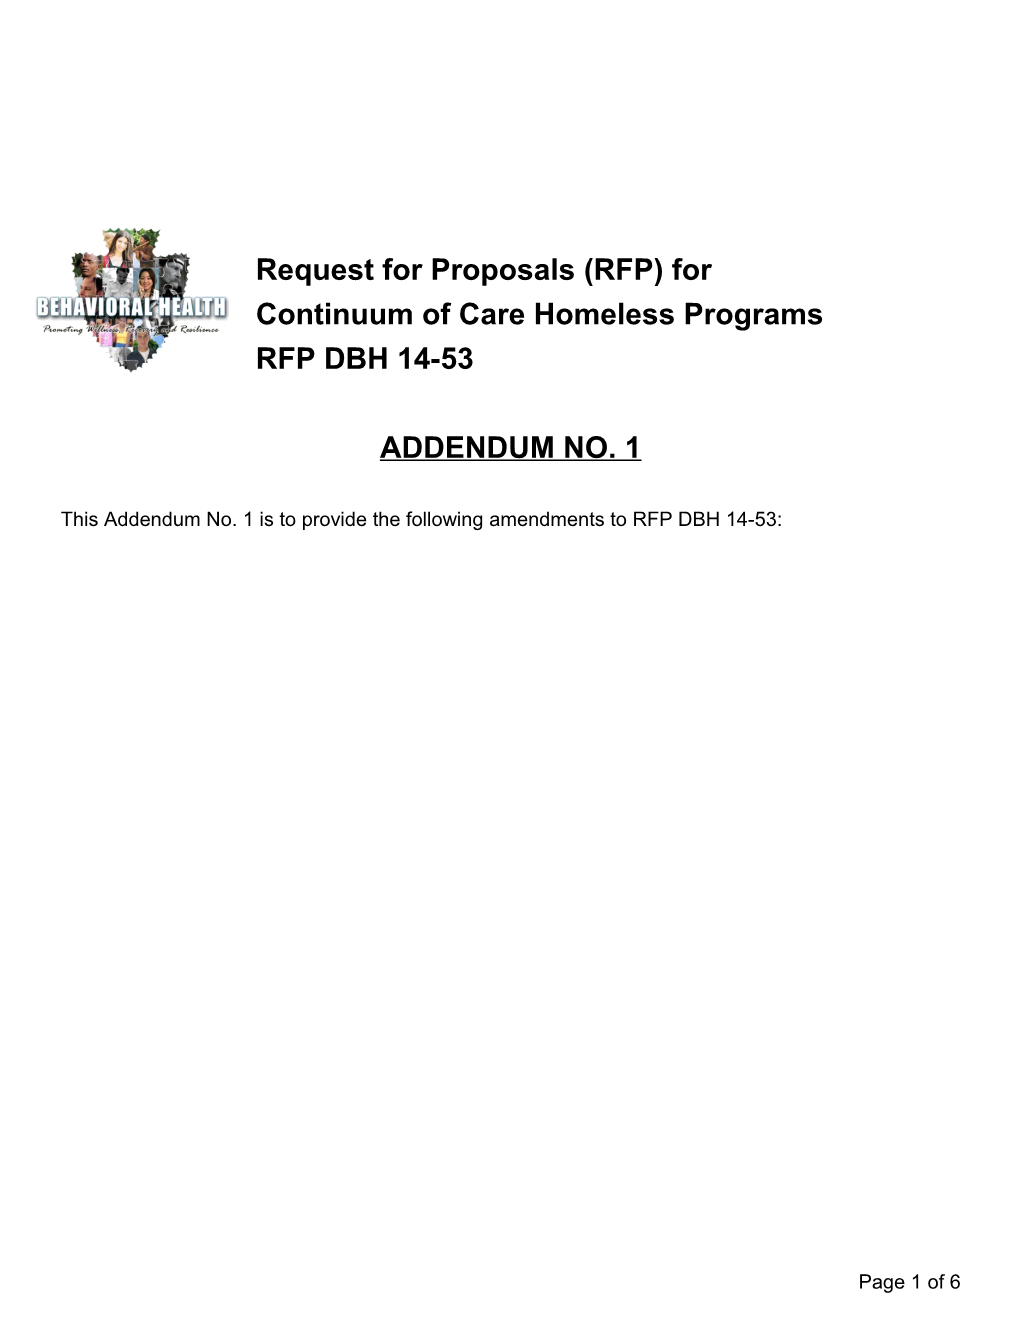 Request for Proposal County of San Bernardino Department of Behavioral Health